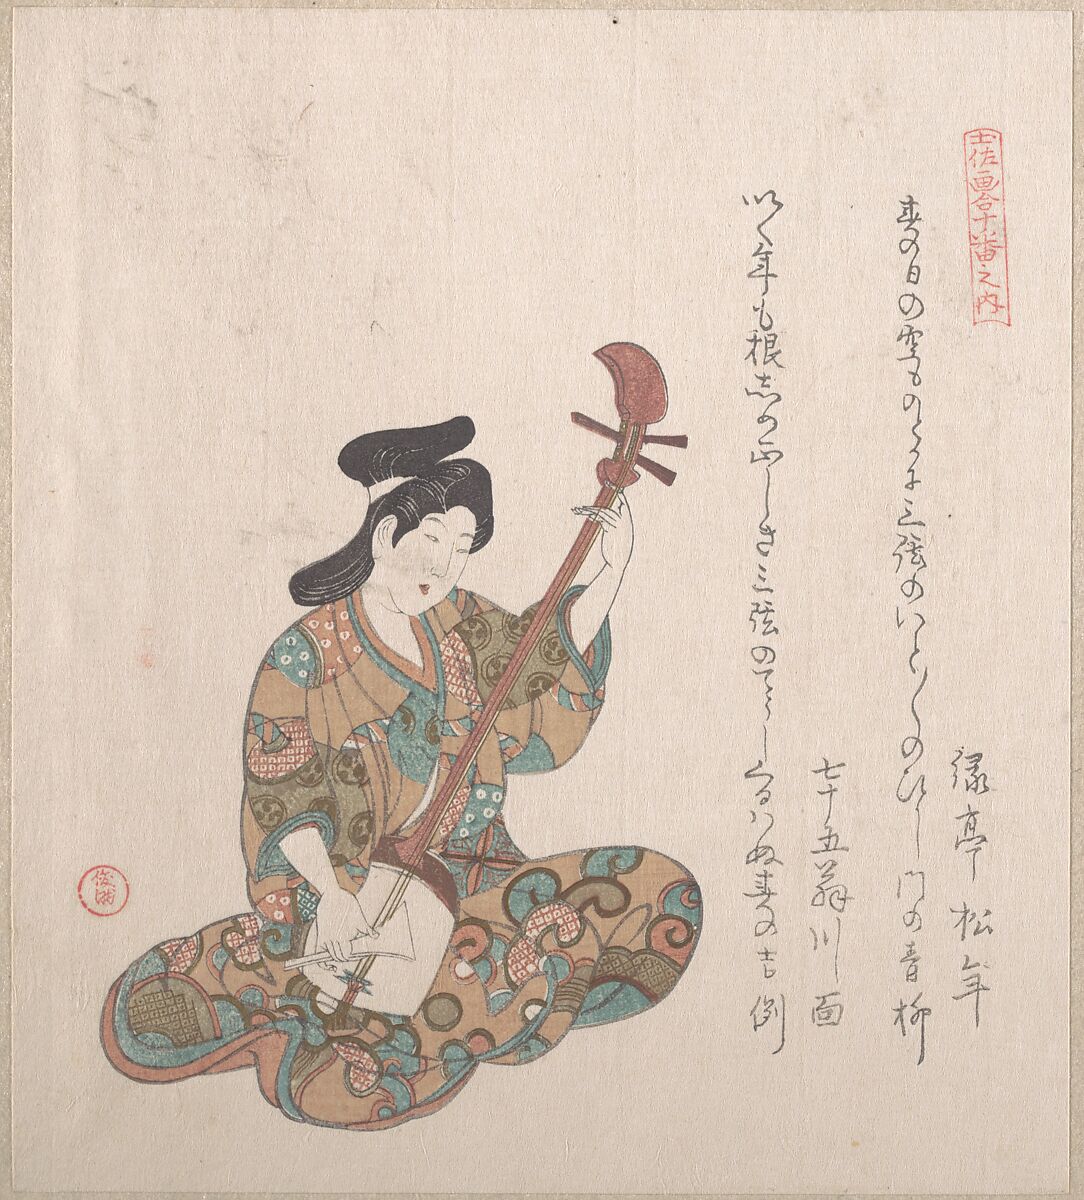 Woman Playing on the Shamisen, Kubo Shunman (Japanese, 1757–1820) (?), Part of an album of woodblock prints (surimono); ink and color on paper, Japan 